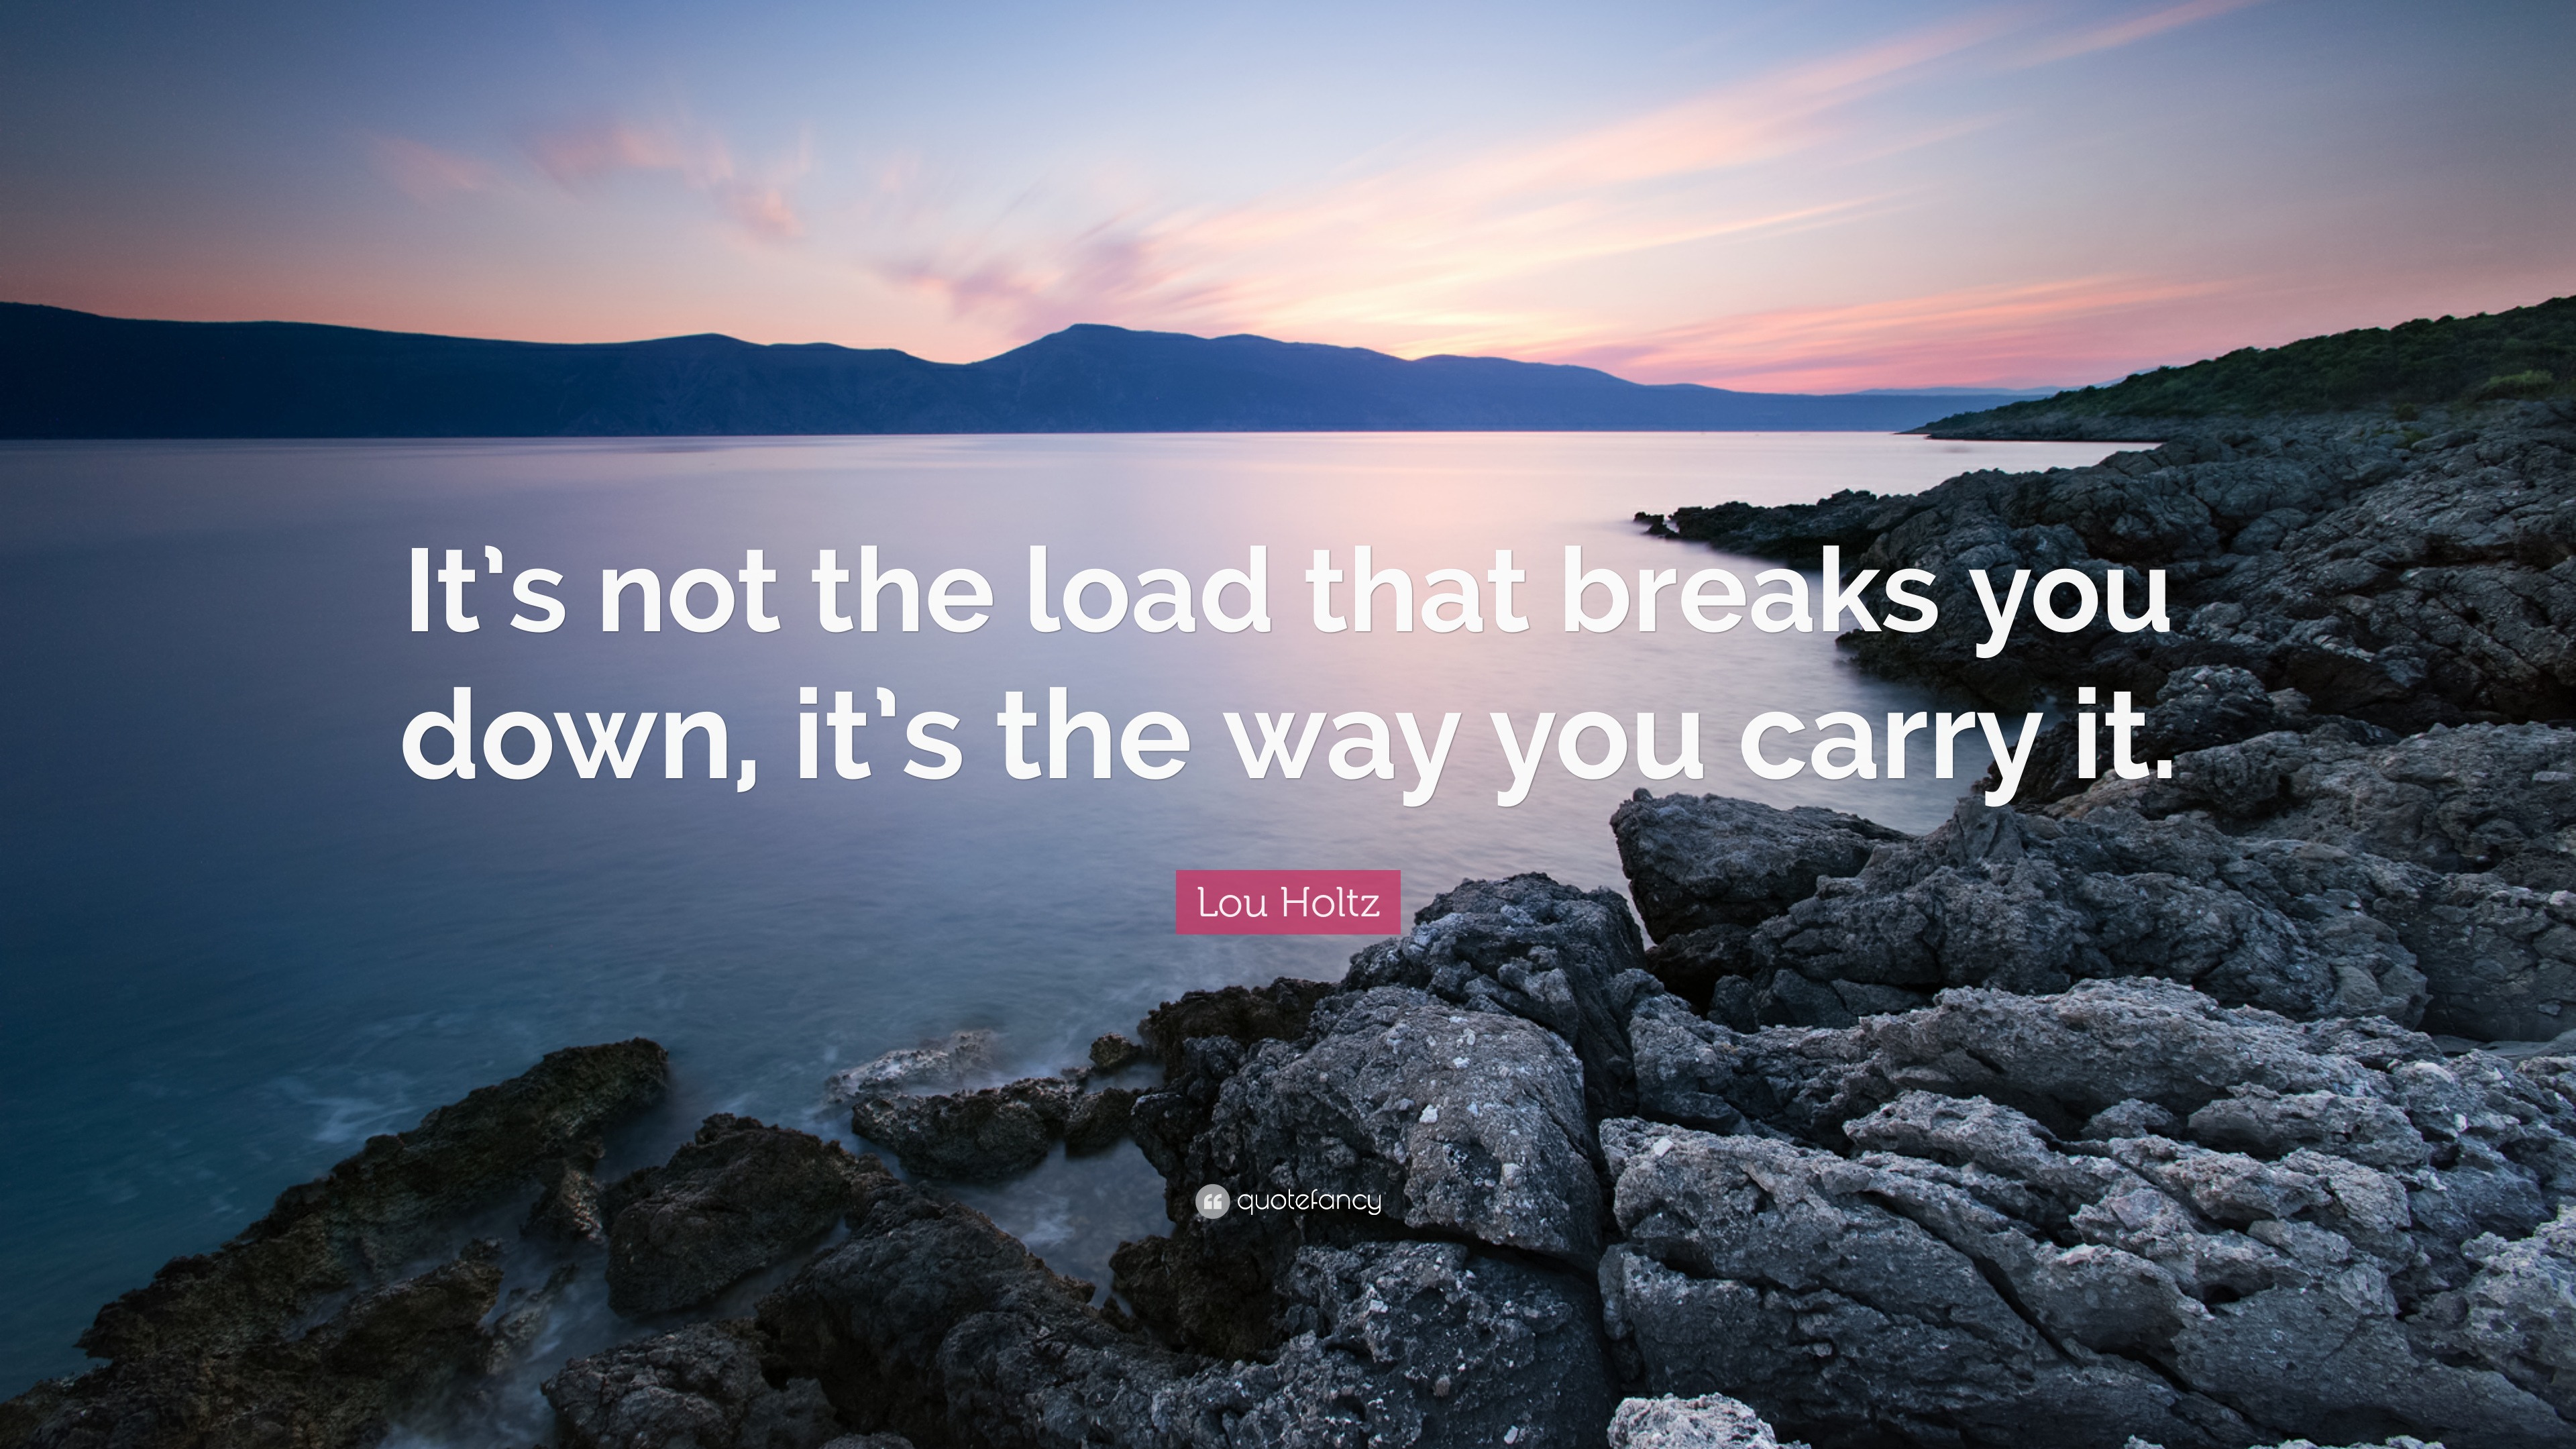 lou-holtz-quote-it-s-not-the-load-that-breaks-you-down-it-s-the-way